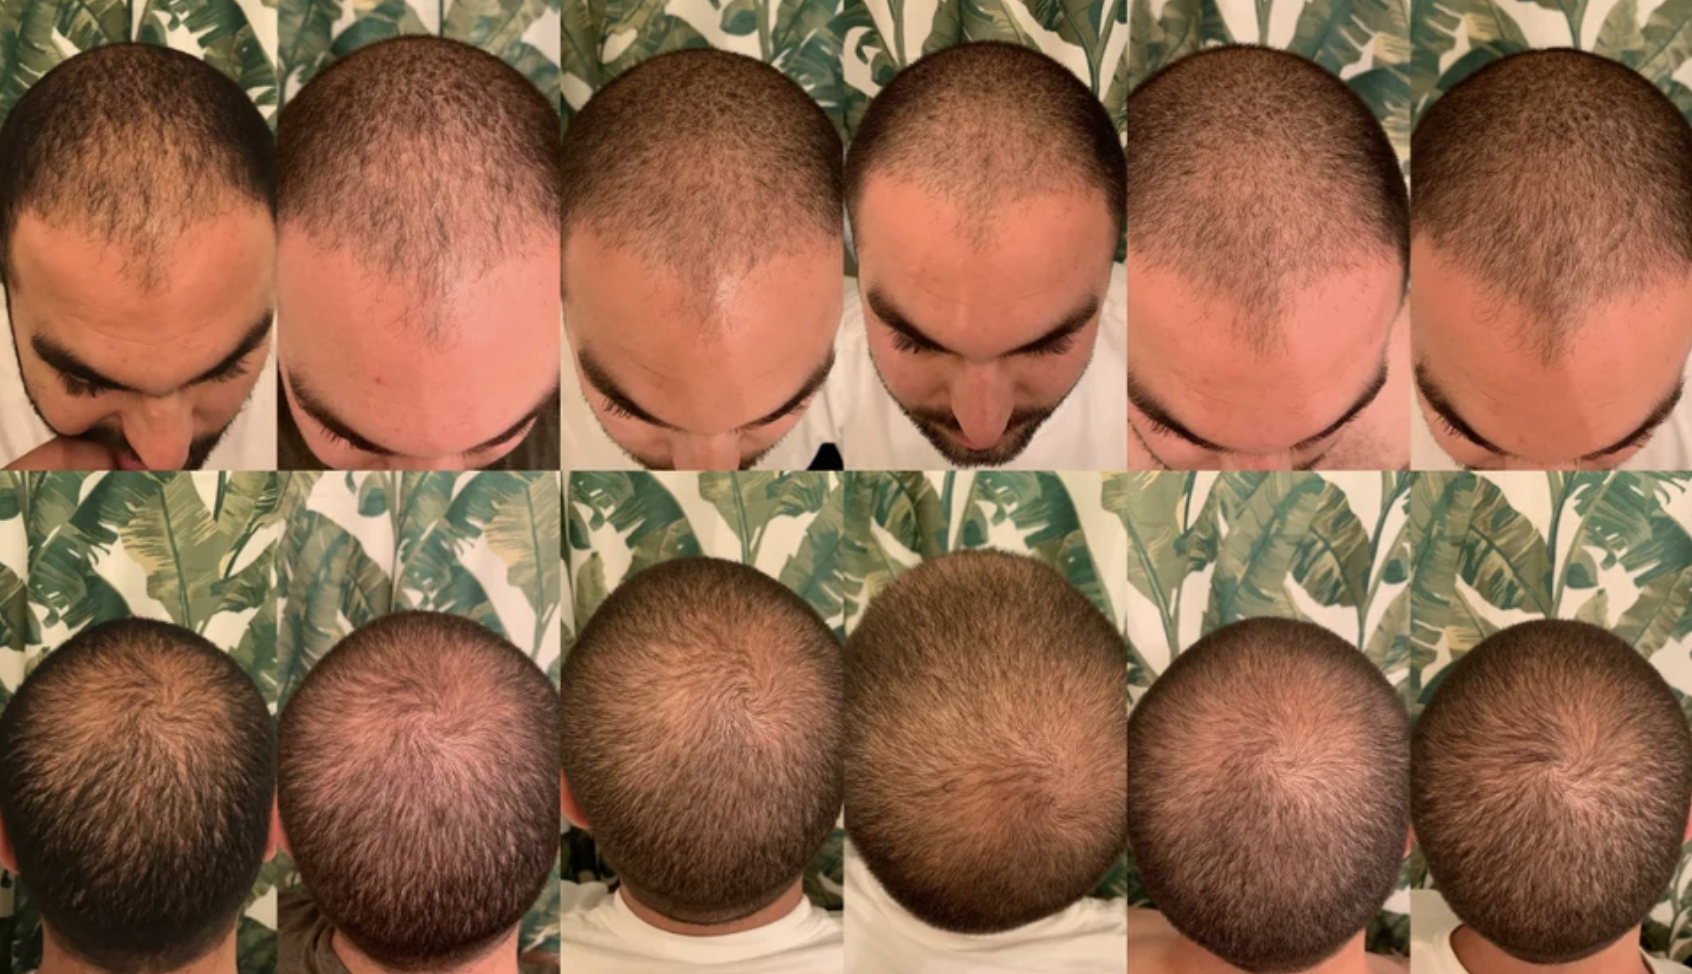 Three months on finasteride, minoxidil and microneedling (from Reddit) .